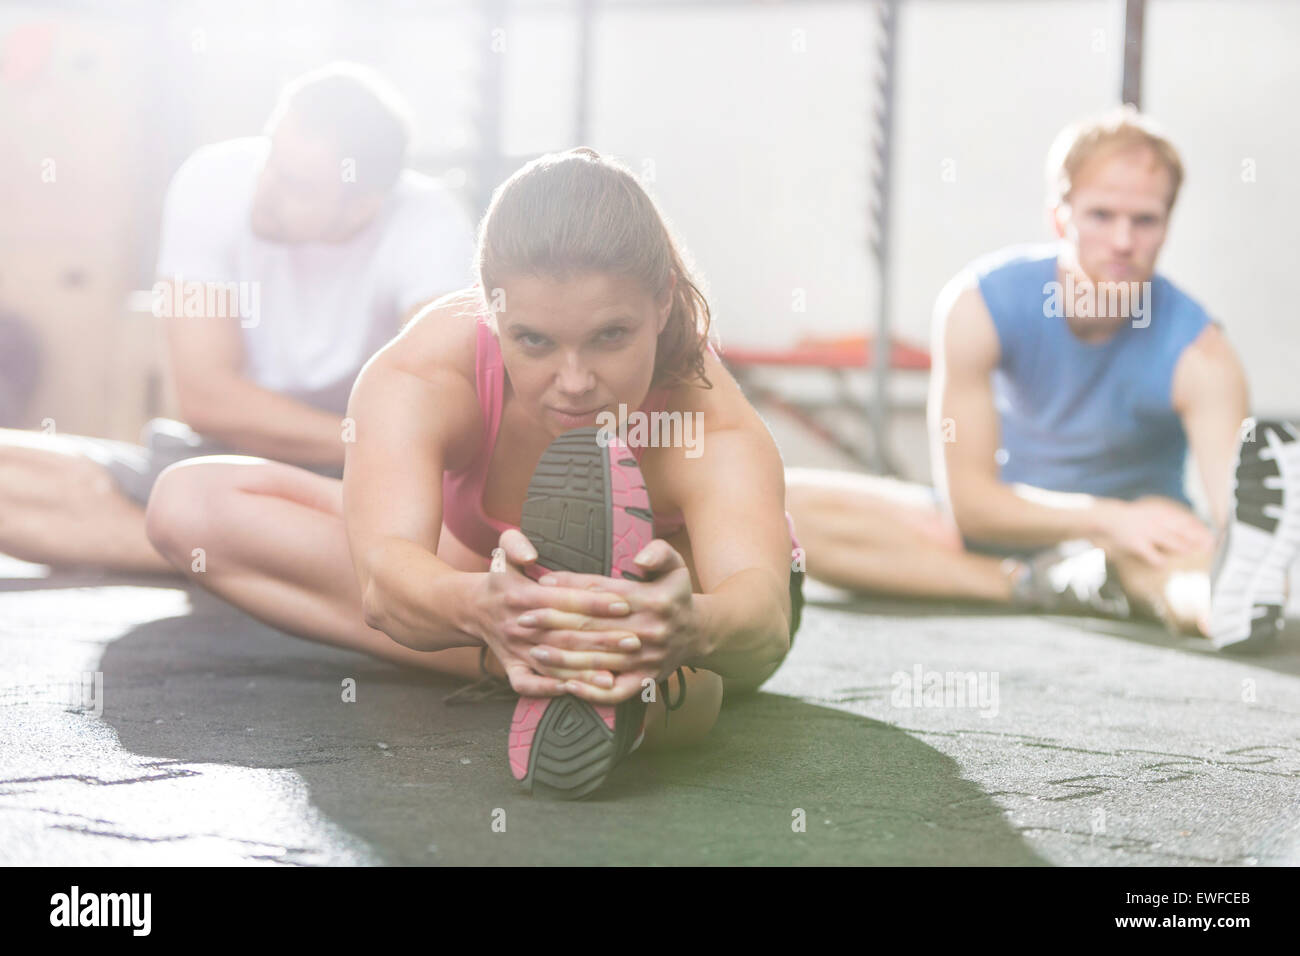 Portrait of confident woman exercising in crossfit gym Stock Photo